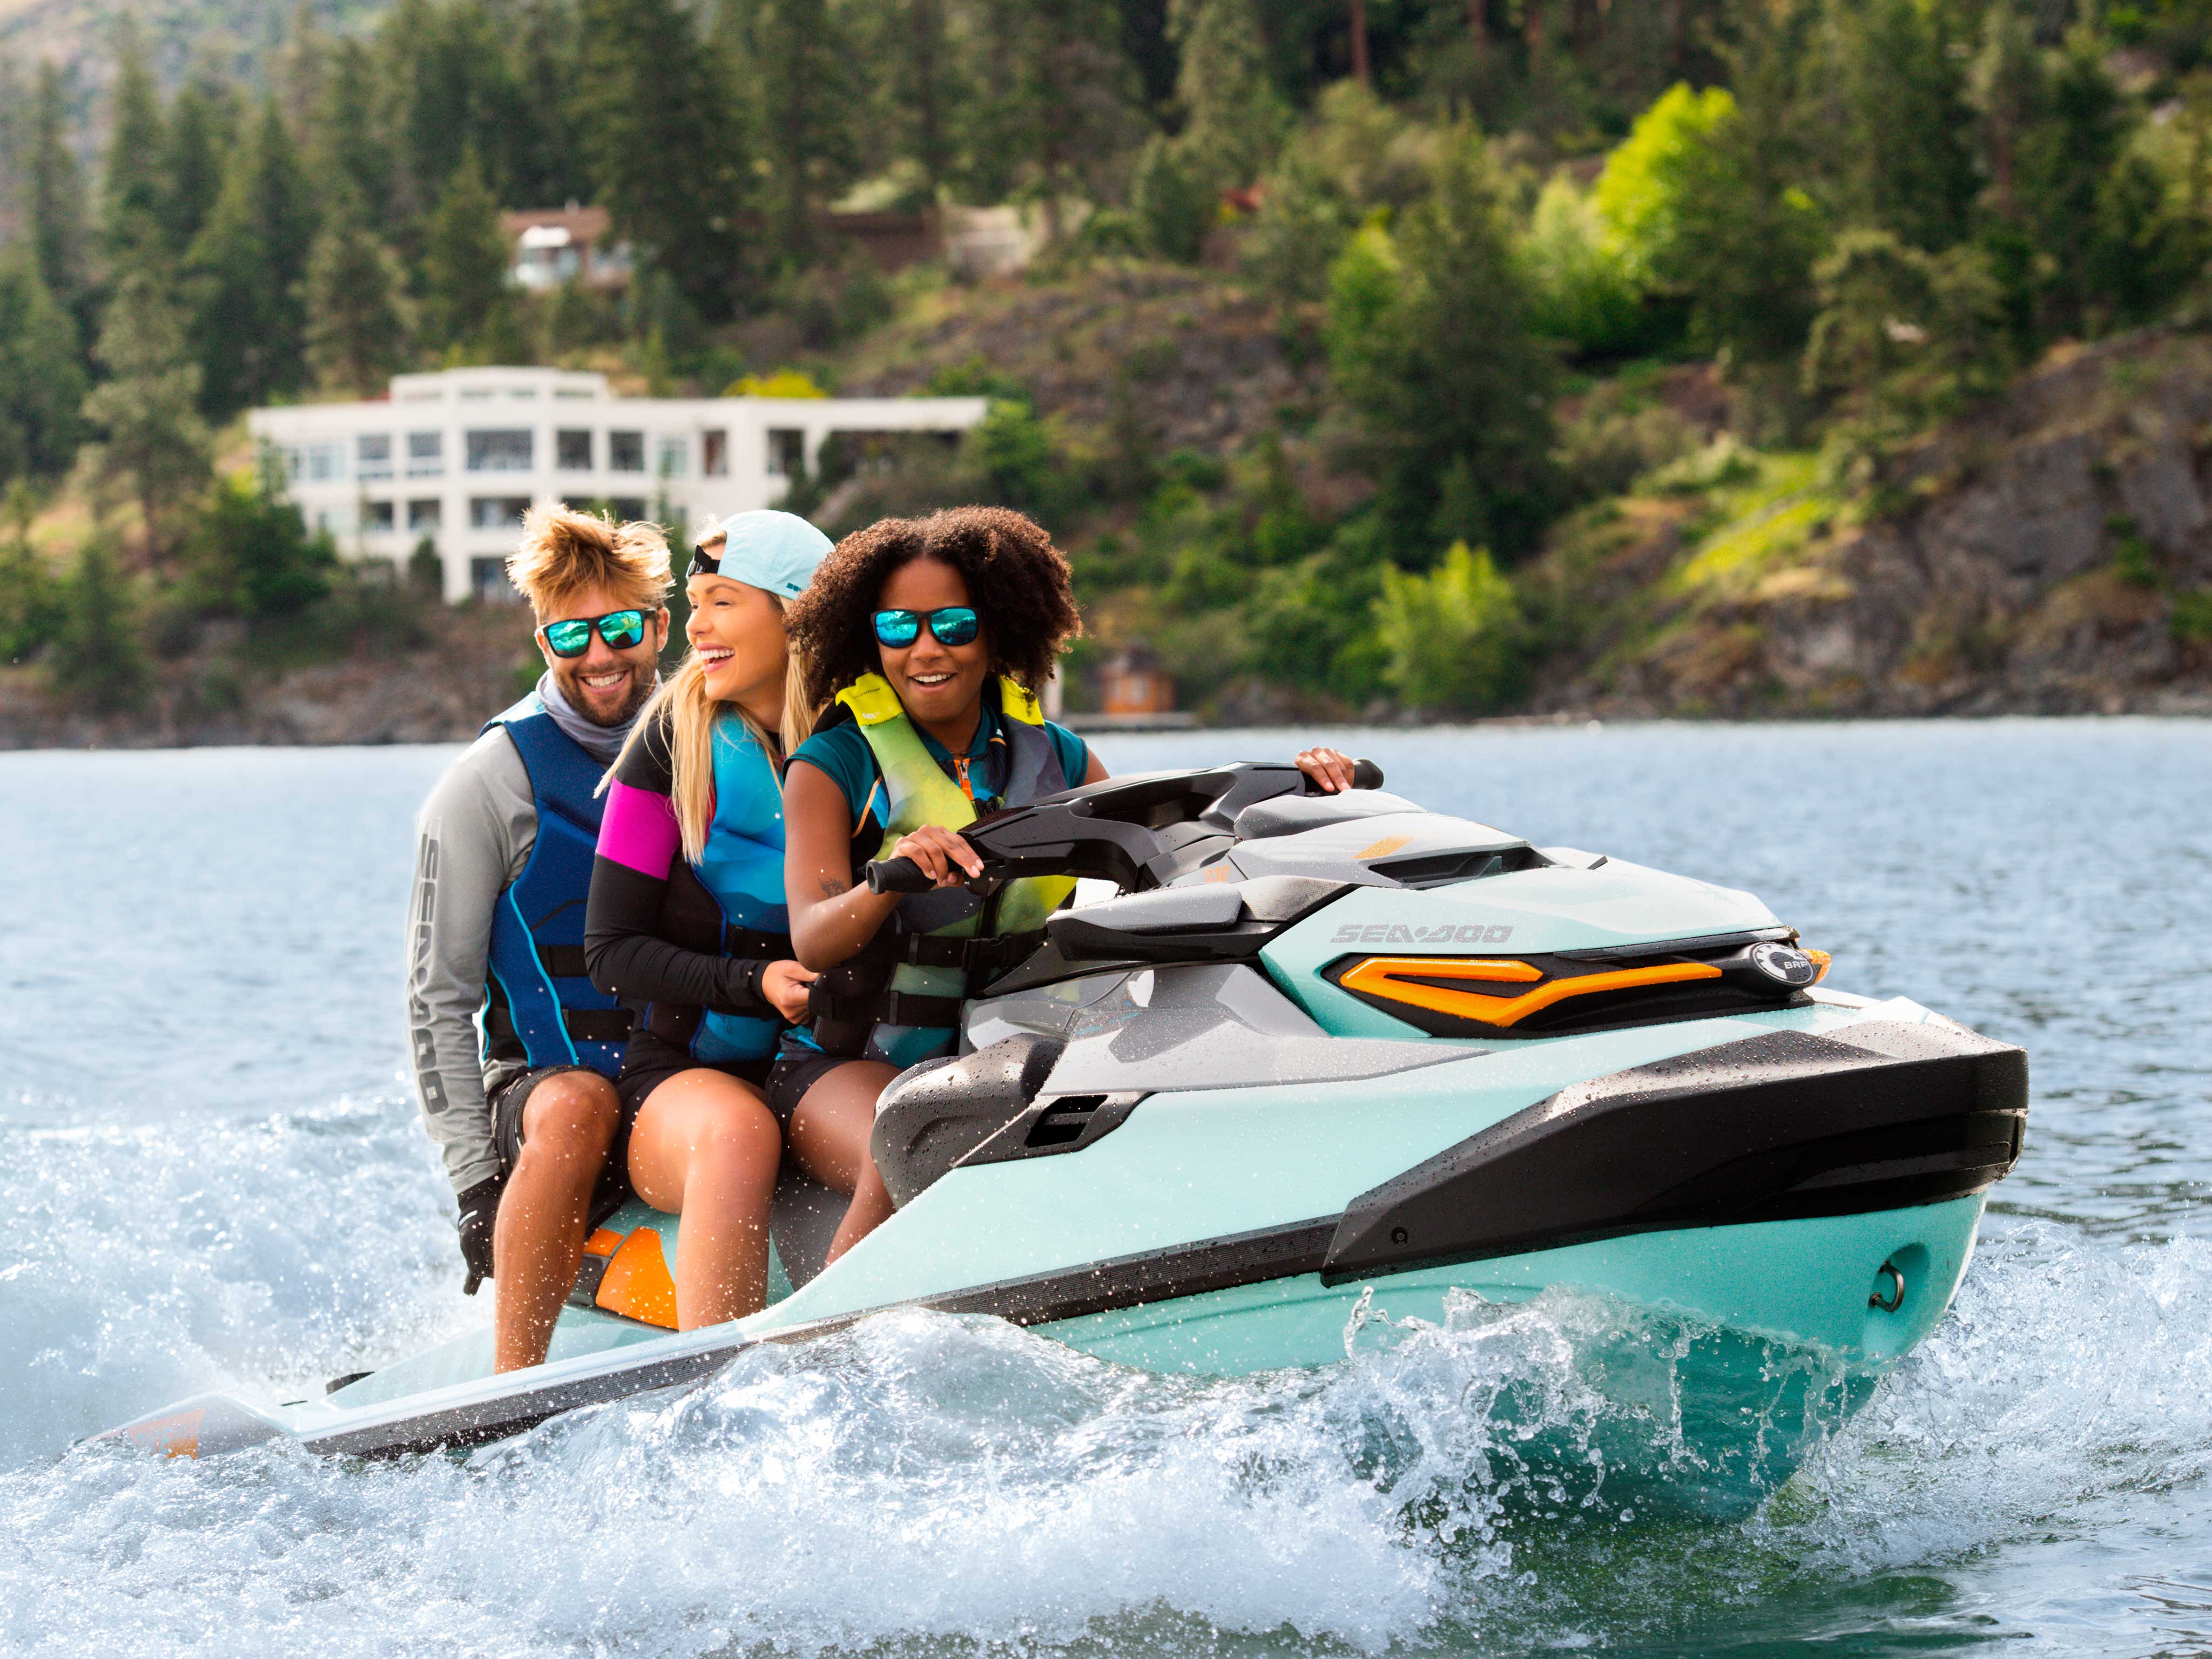 Personal watercraft and boat shows and events SeaDoo